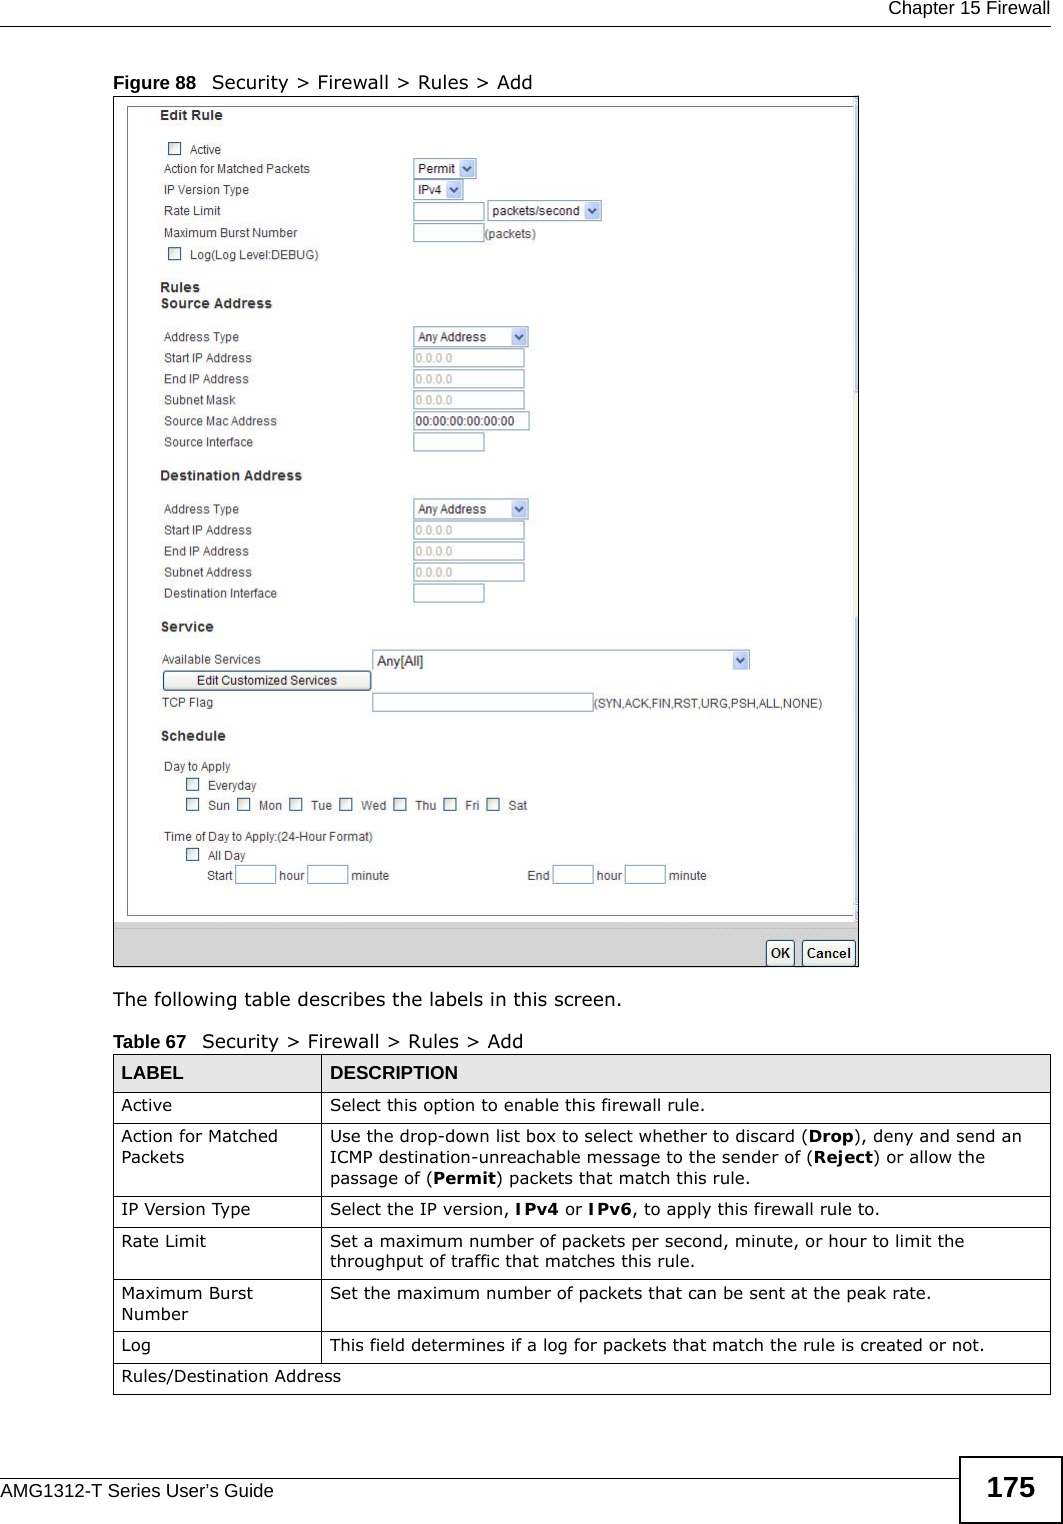  Chapter 15 FirewallAMG1312-T Series User’s Guide 175Figure 88   Security &gt; Firewall &gt; Rules &gt; Add The following table describes the labels in this screen. Table 67   Security &gt; Firewall &gt; Rules &gt; AddLABEL DESCRIPTIONActive Select this option to enable this firewall rule. Action for Matched PacketsUse the drop-down list box to select whether to discard (Drop), deny and send an ICMP destination-unreachable message to the sender of (Reject) or allow the passage of (Permit) packets that match this rule. IP Version Type Select the IP version, IPv4 or IPv6, to apply this firewall rule to.Rate Limit Set a maximum number of packets per second, minute, or hour to limit the throughput of traffic that matches this rule. Maximum Burst NumberSet the maximum number of packets that can be sent at the peak rate. Log This field determines if a log for packets that match the rule is created or not. Rules/Destination Address